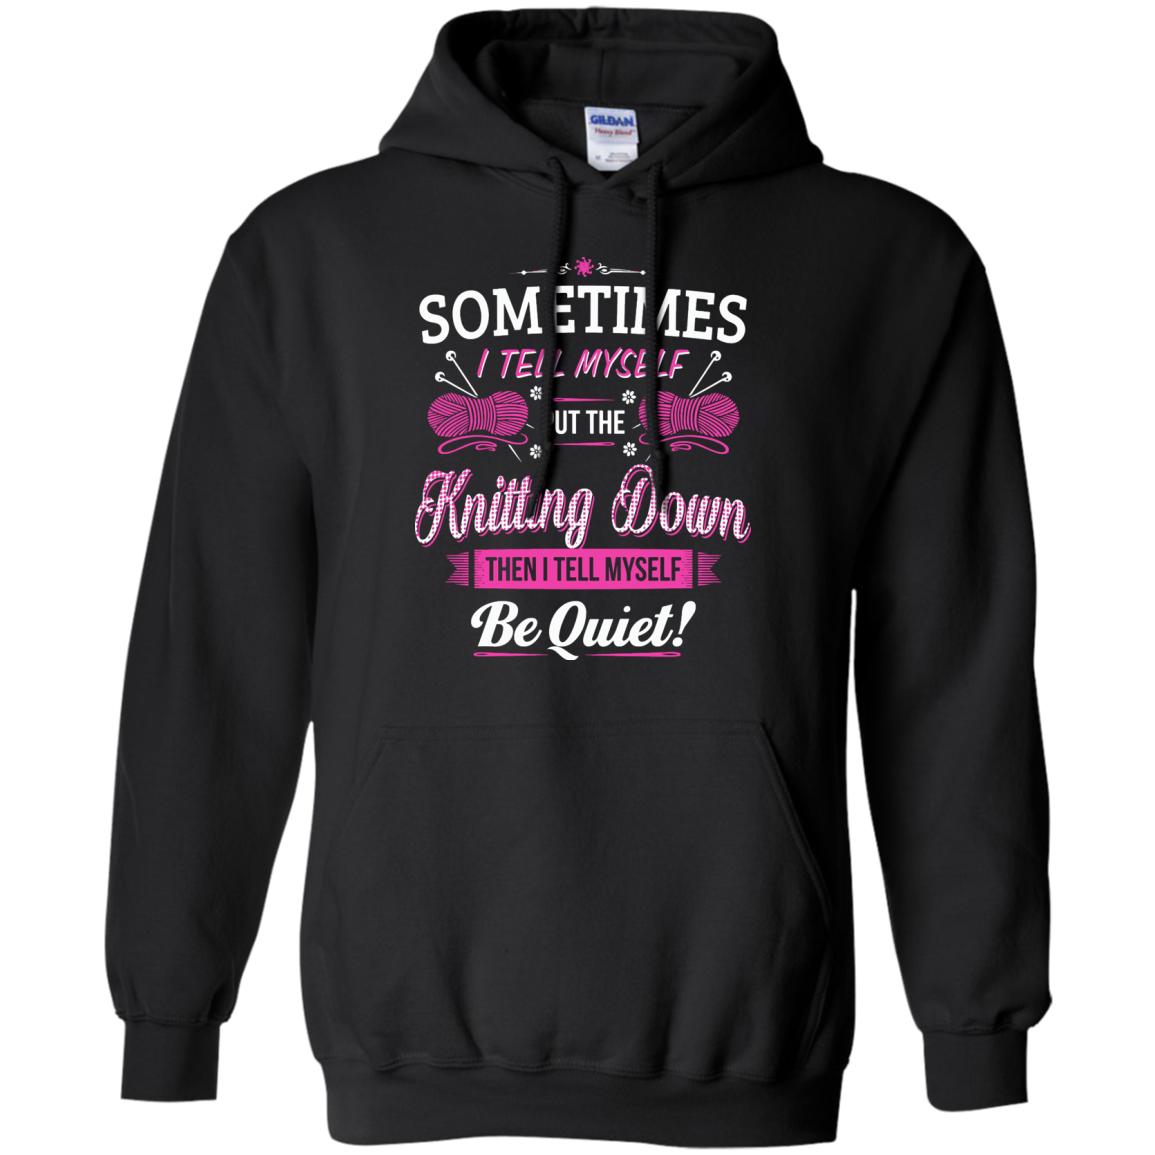 Put the Knitting Down Pullover Hoodies - Crafter4Life - 3